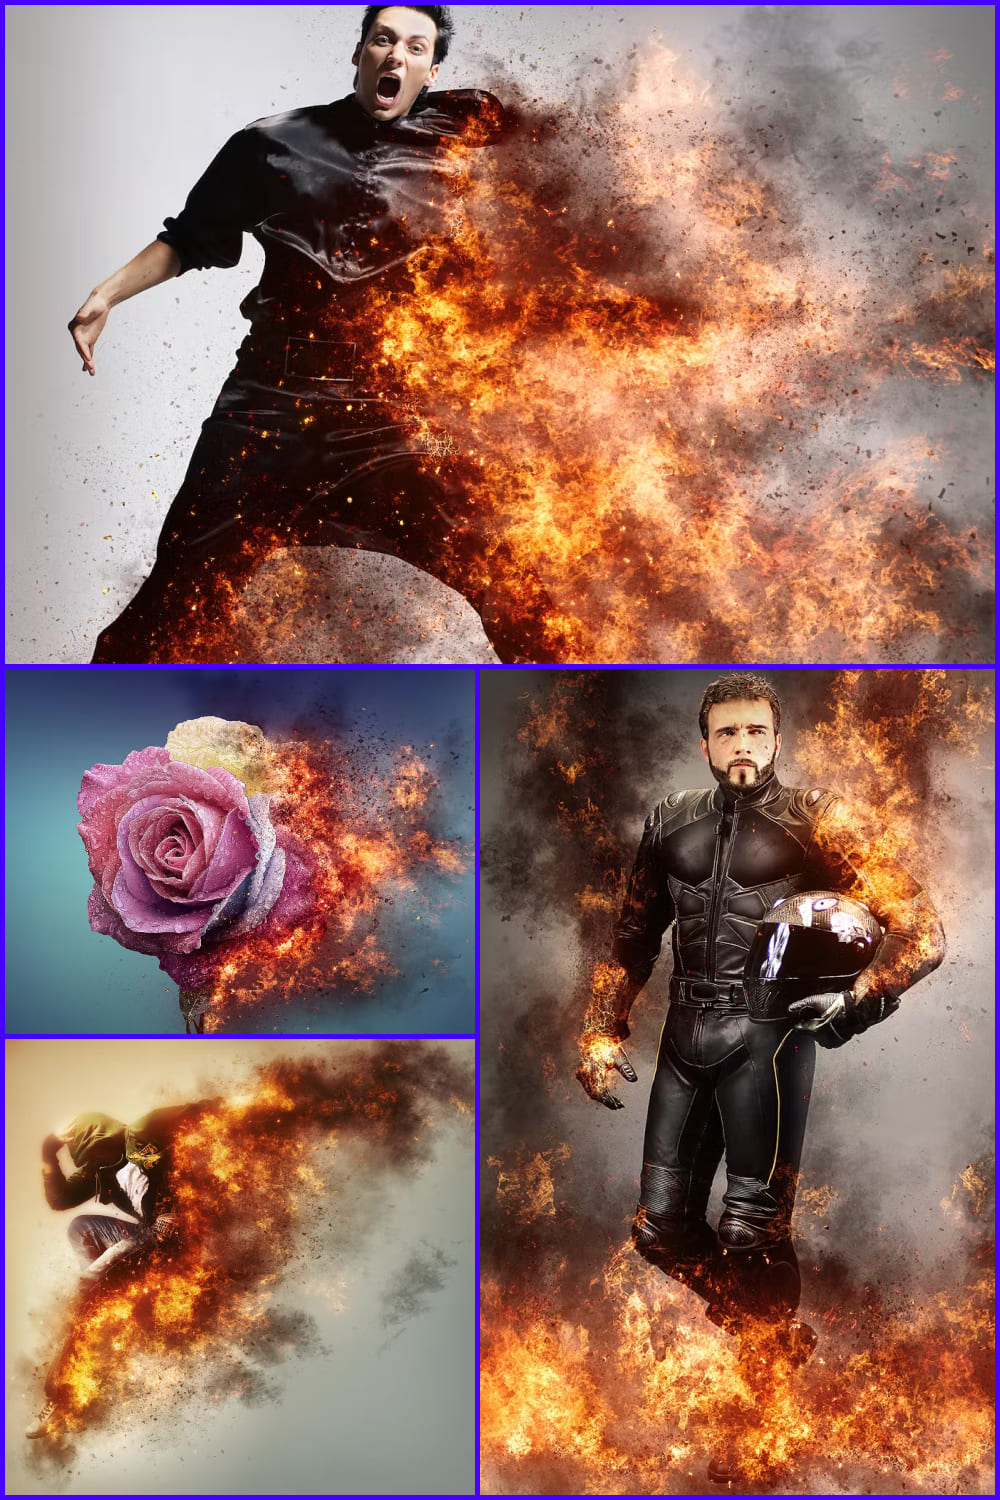 Collage of photos of a motorcyclist, a flower and a guy in black with a burning effect.